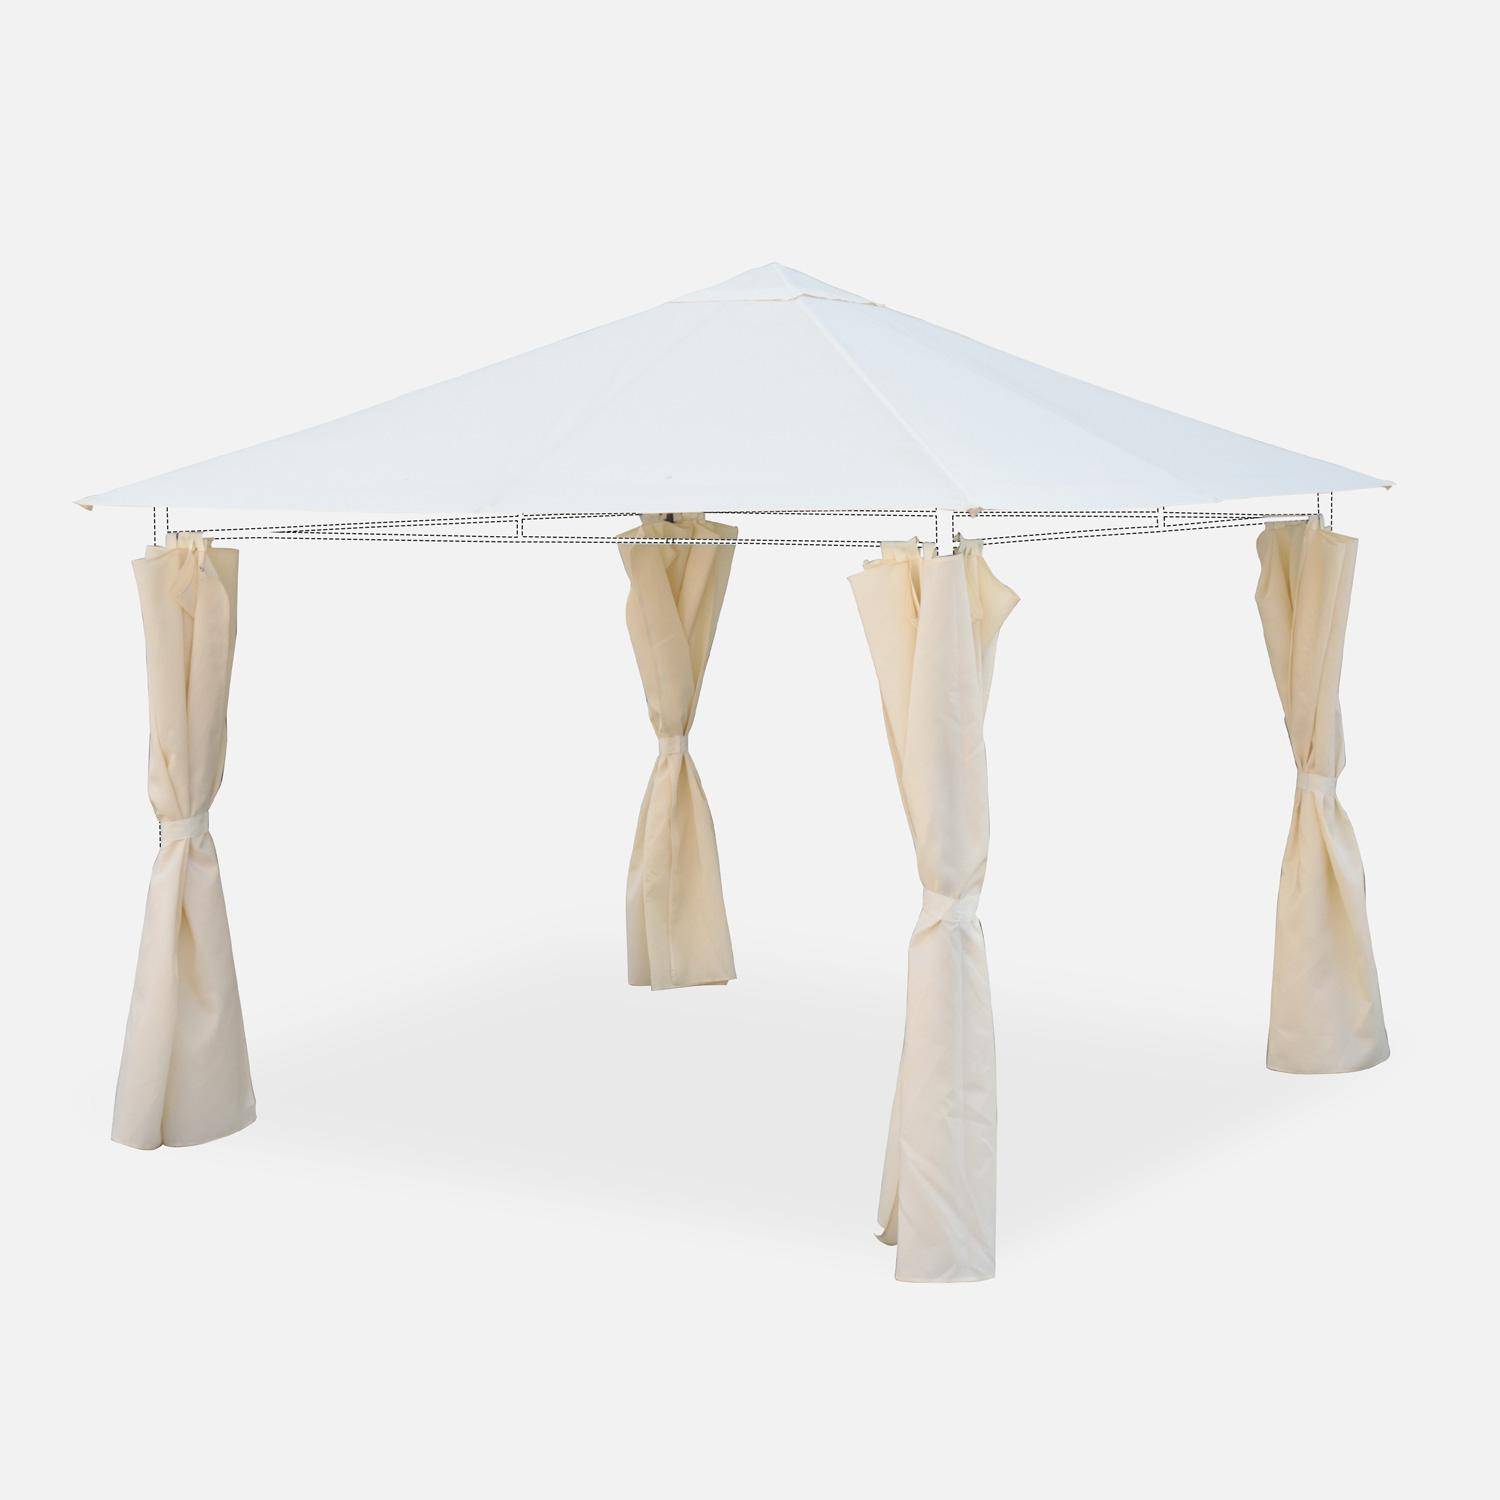 Replacement canopy and side curtain kit for Elusa 3x3m gazebo - replacement gazebo canopy and side curtains - Off-White Photo1